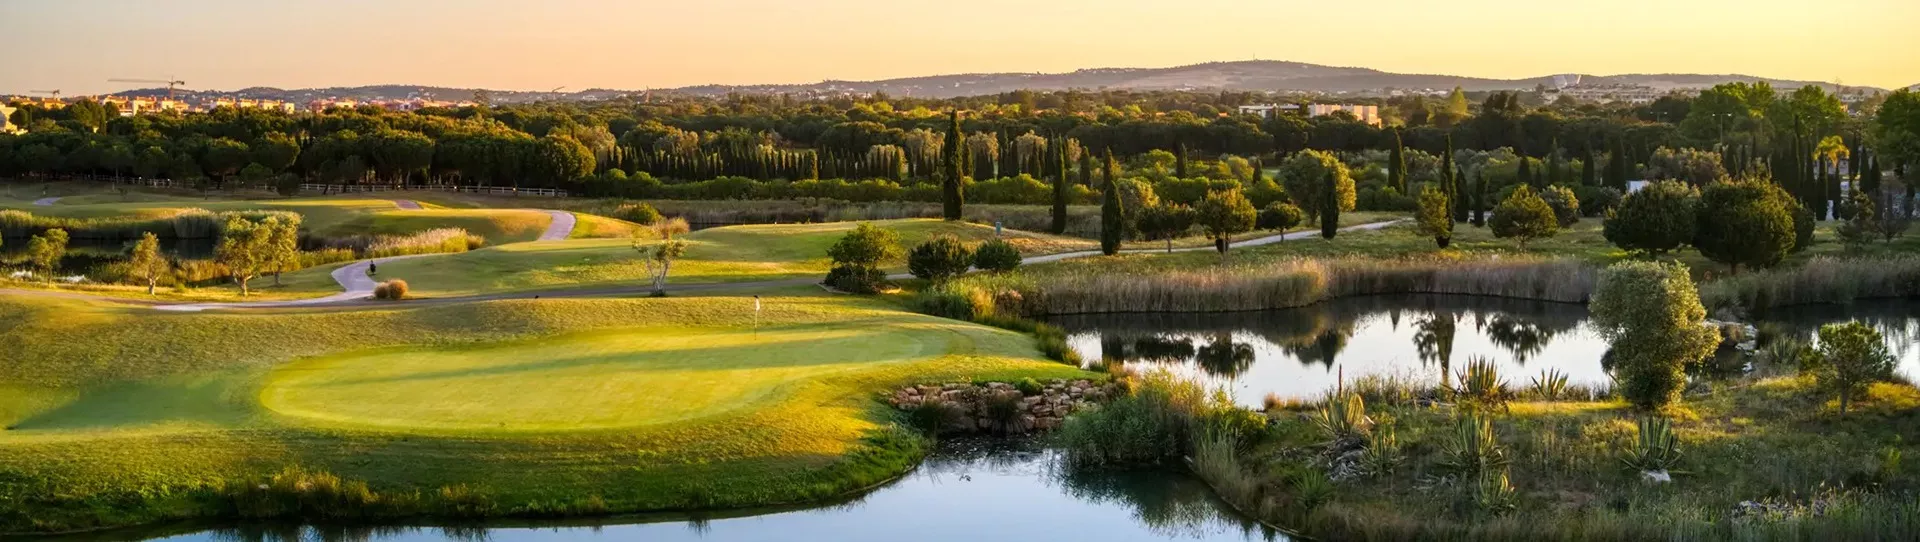 Victoria Golf Course Vilamoura - Golf Courses - Golf Holidays in Portugal -  Golf Packages & Golf Hotels Lisbon, Algarve